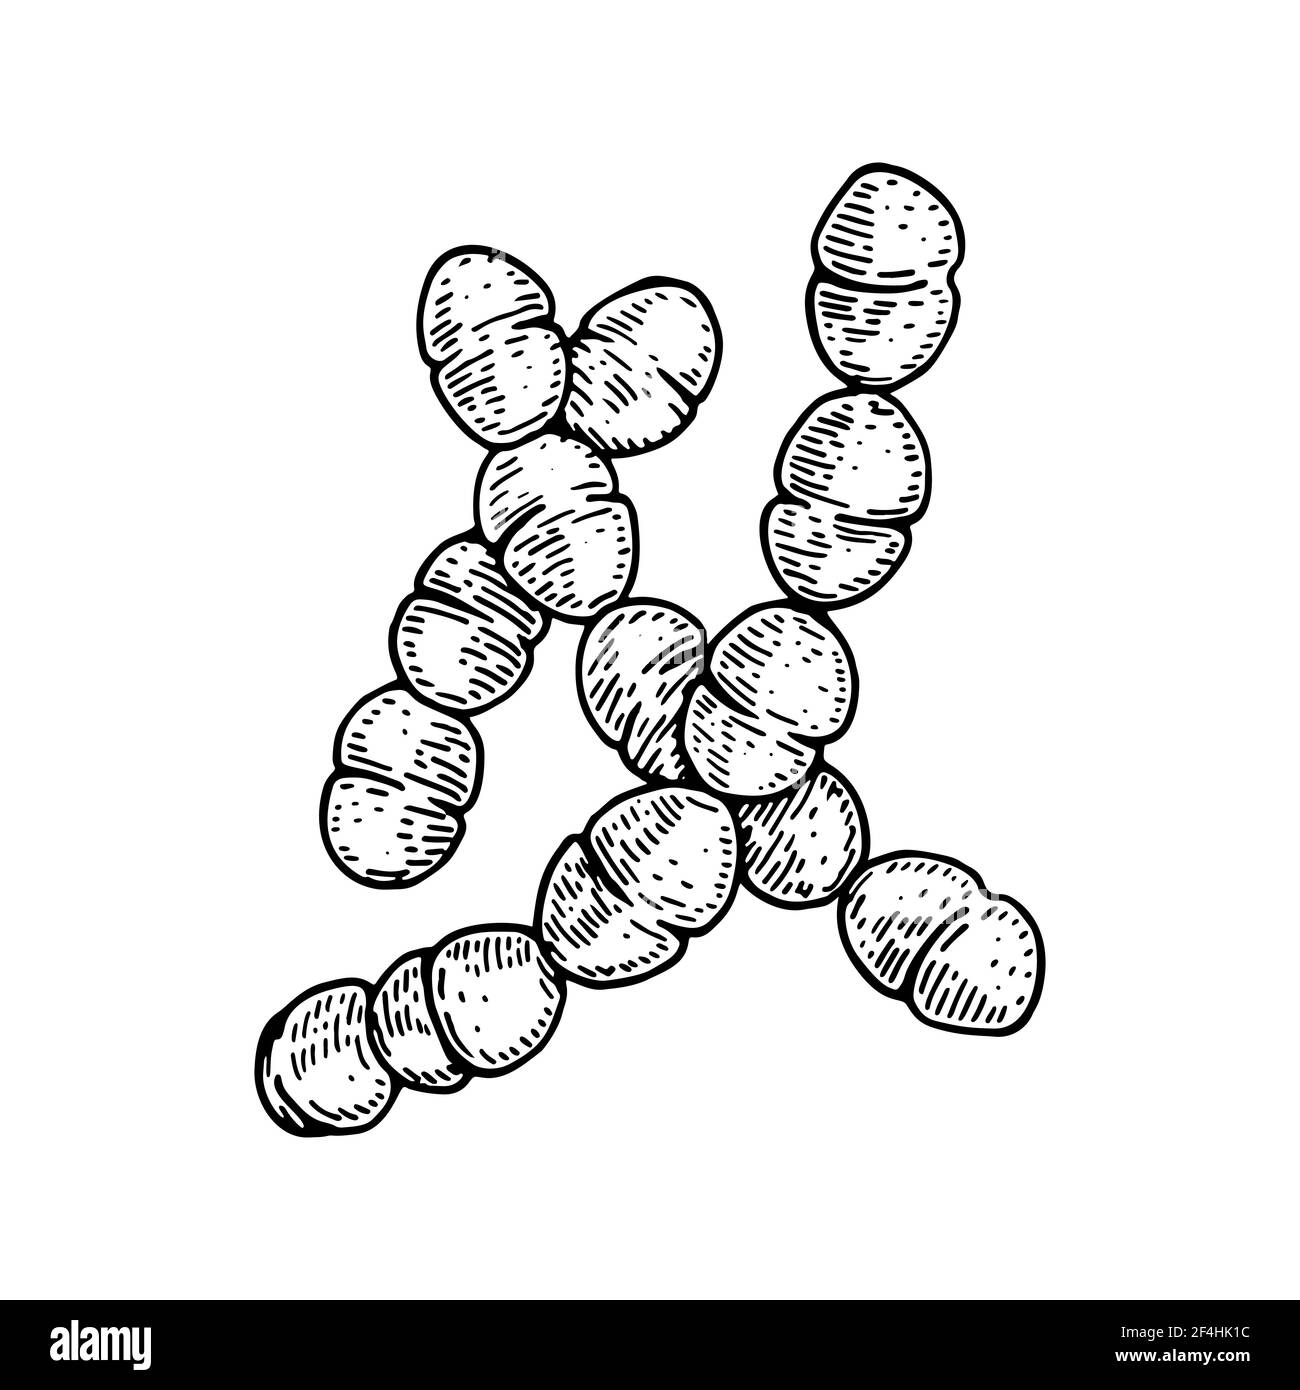 Hand drawn probiotic streptococcus thermophiles bacteria. Good microorganism for human health and digestion regulation. Vector illustration in sketch Stock Vector